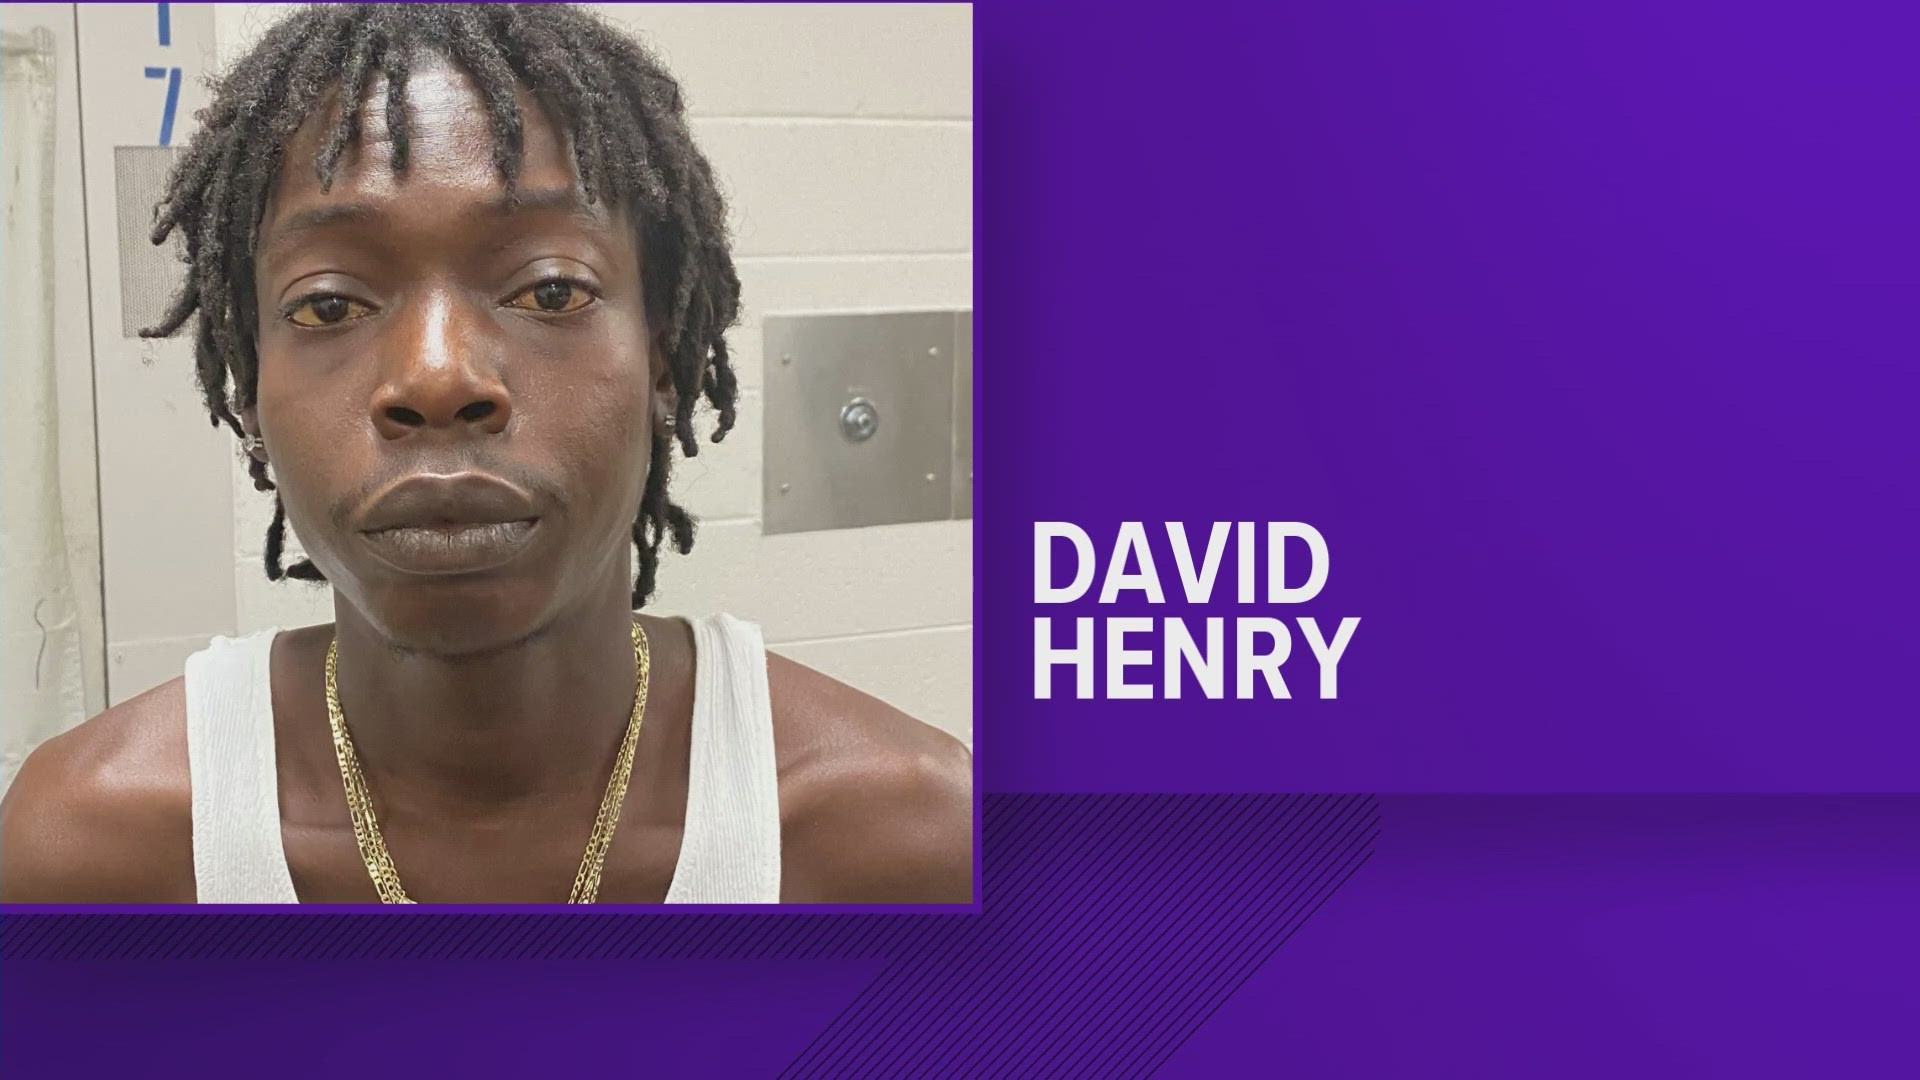 Police said Henry is accused of shooting and killing Kelvin Stowers Jr.